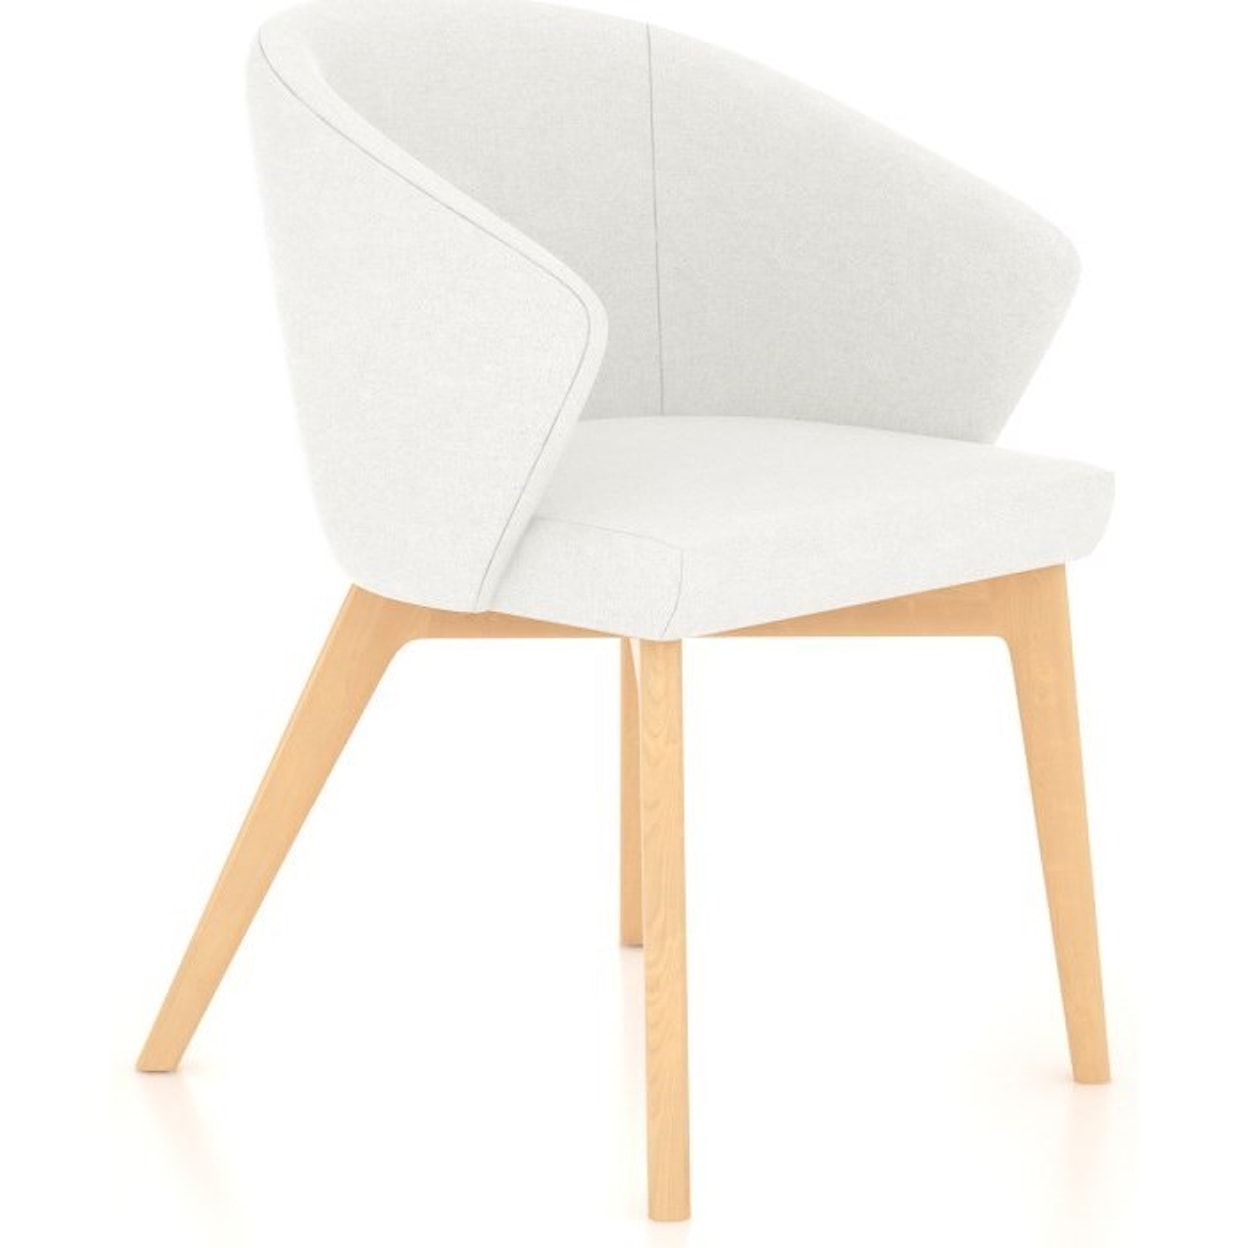 Canadel Downtown Upholstered Dining Chair